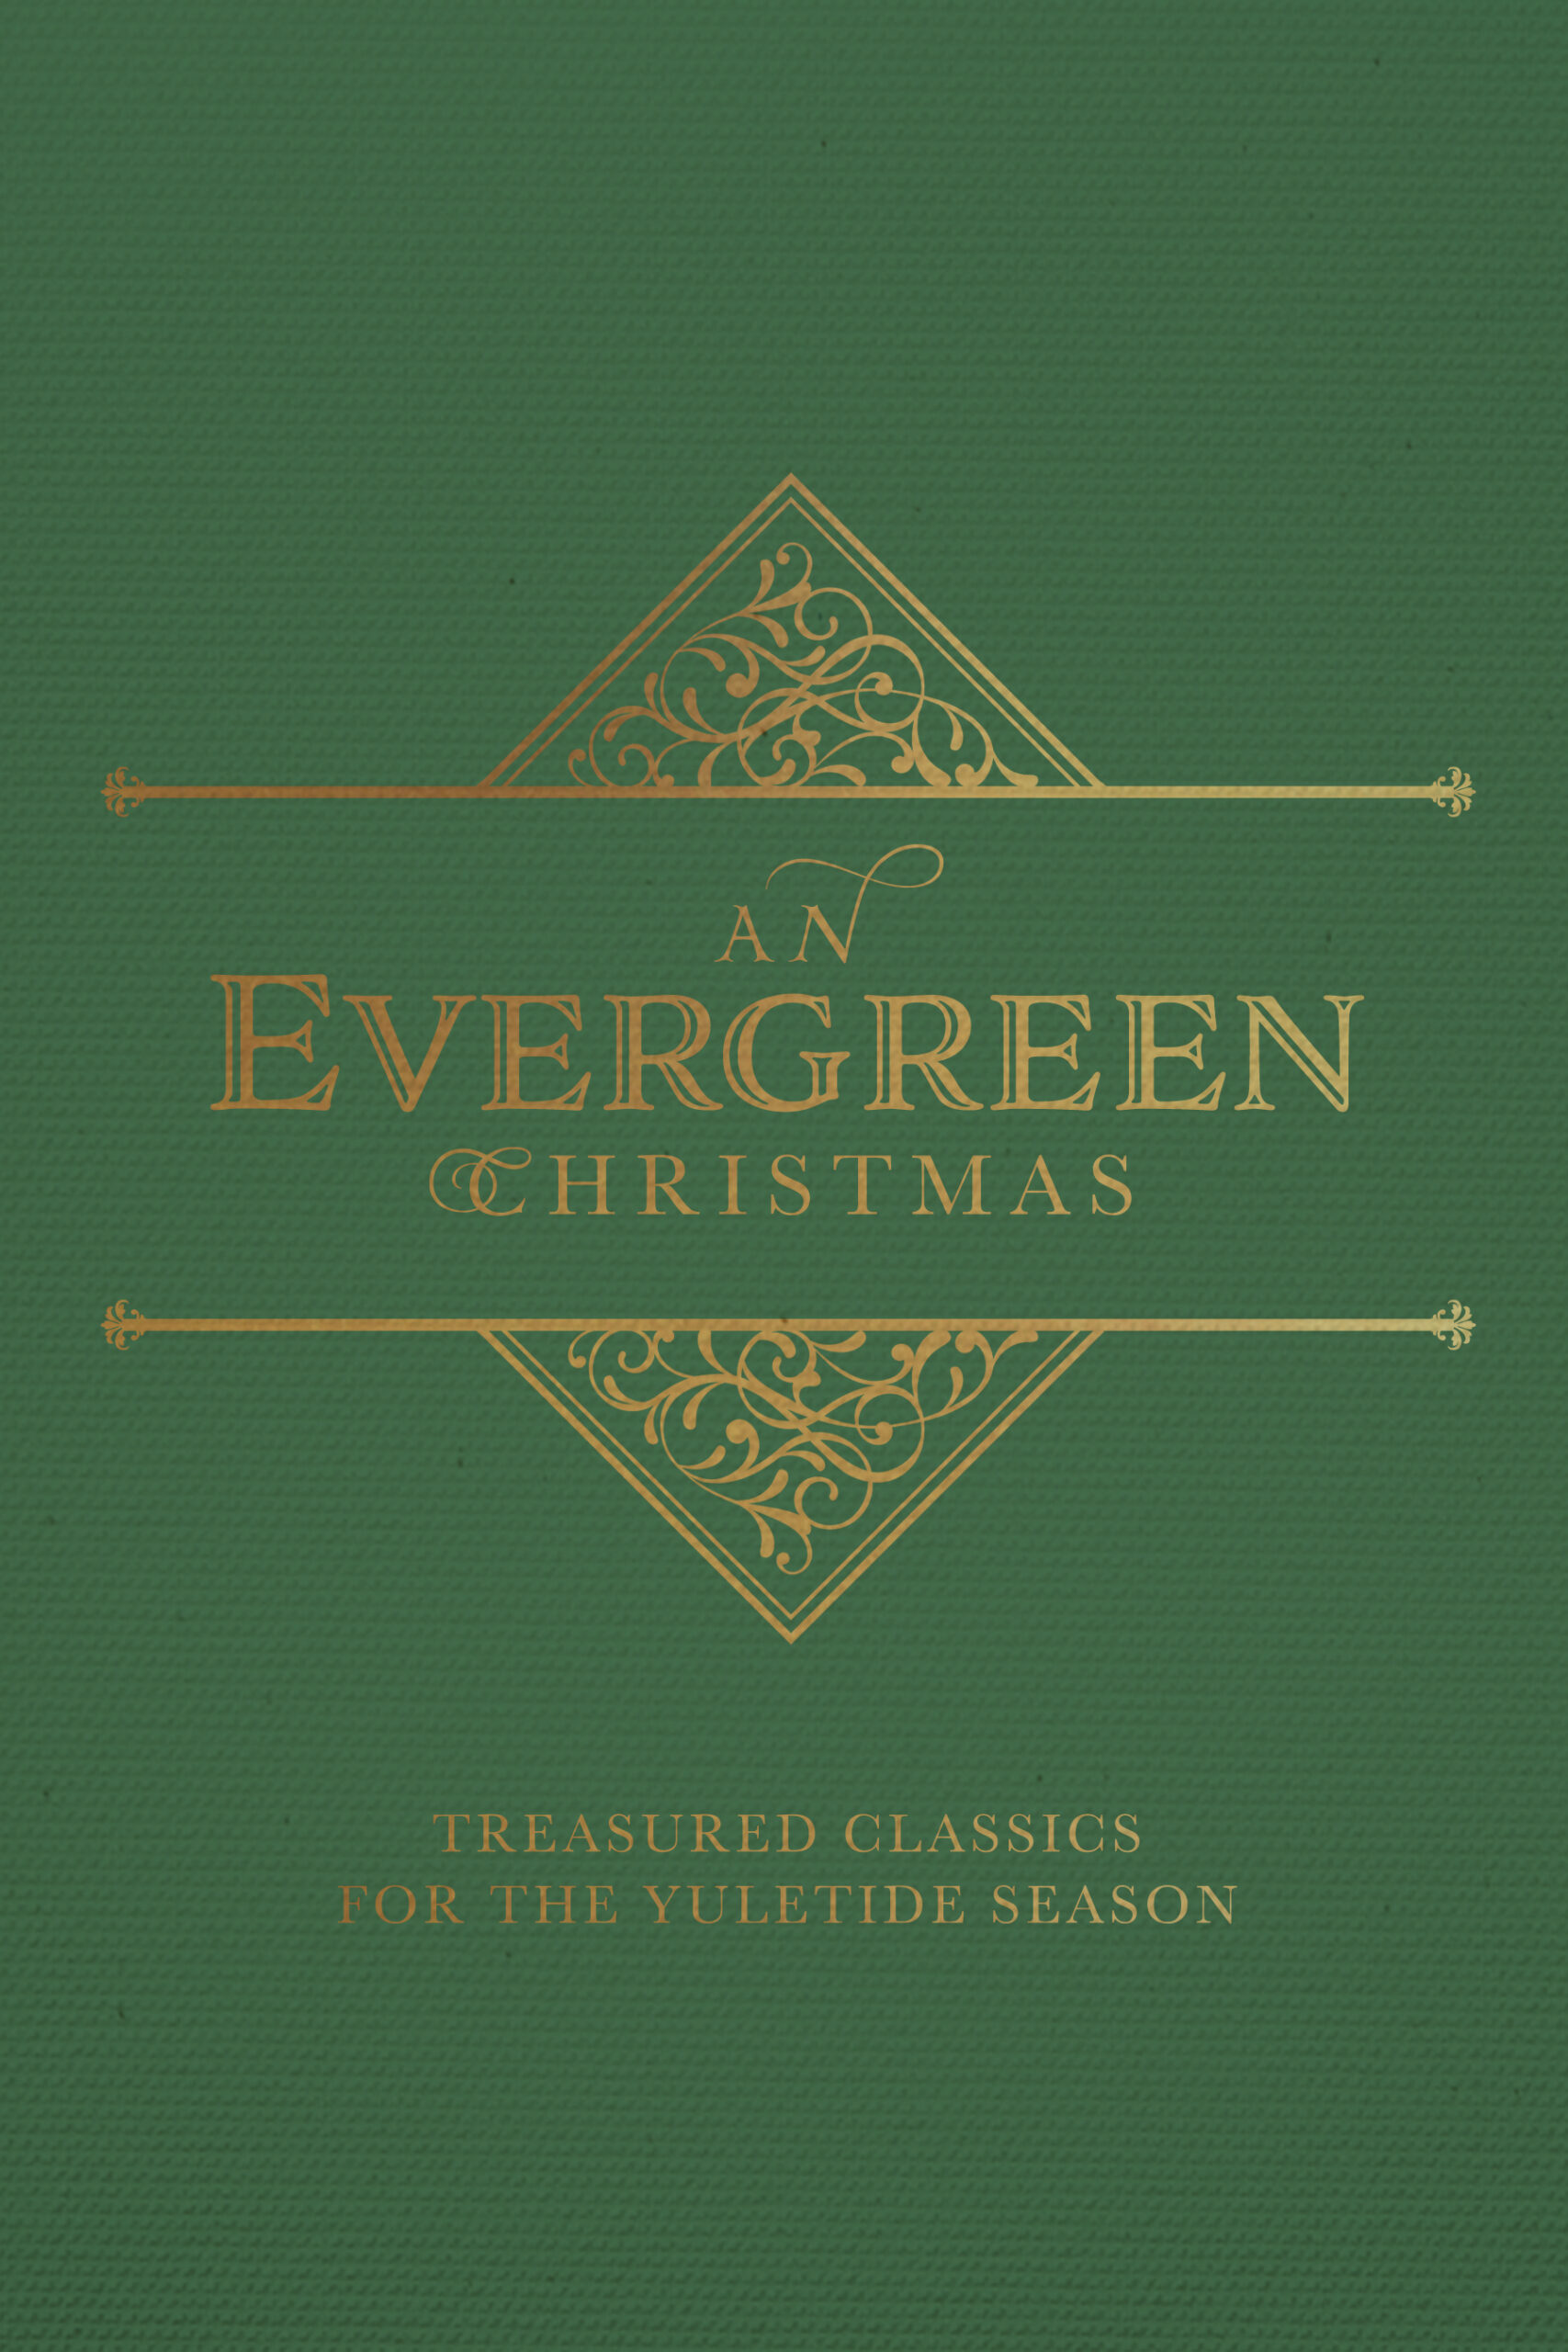 An Evergreen Christmas book cover shows green background with gold titling and details